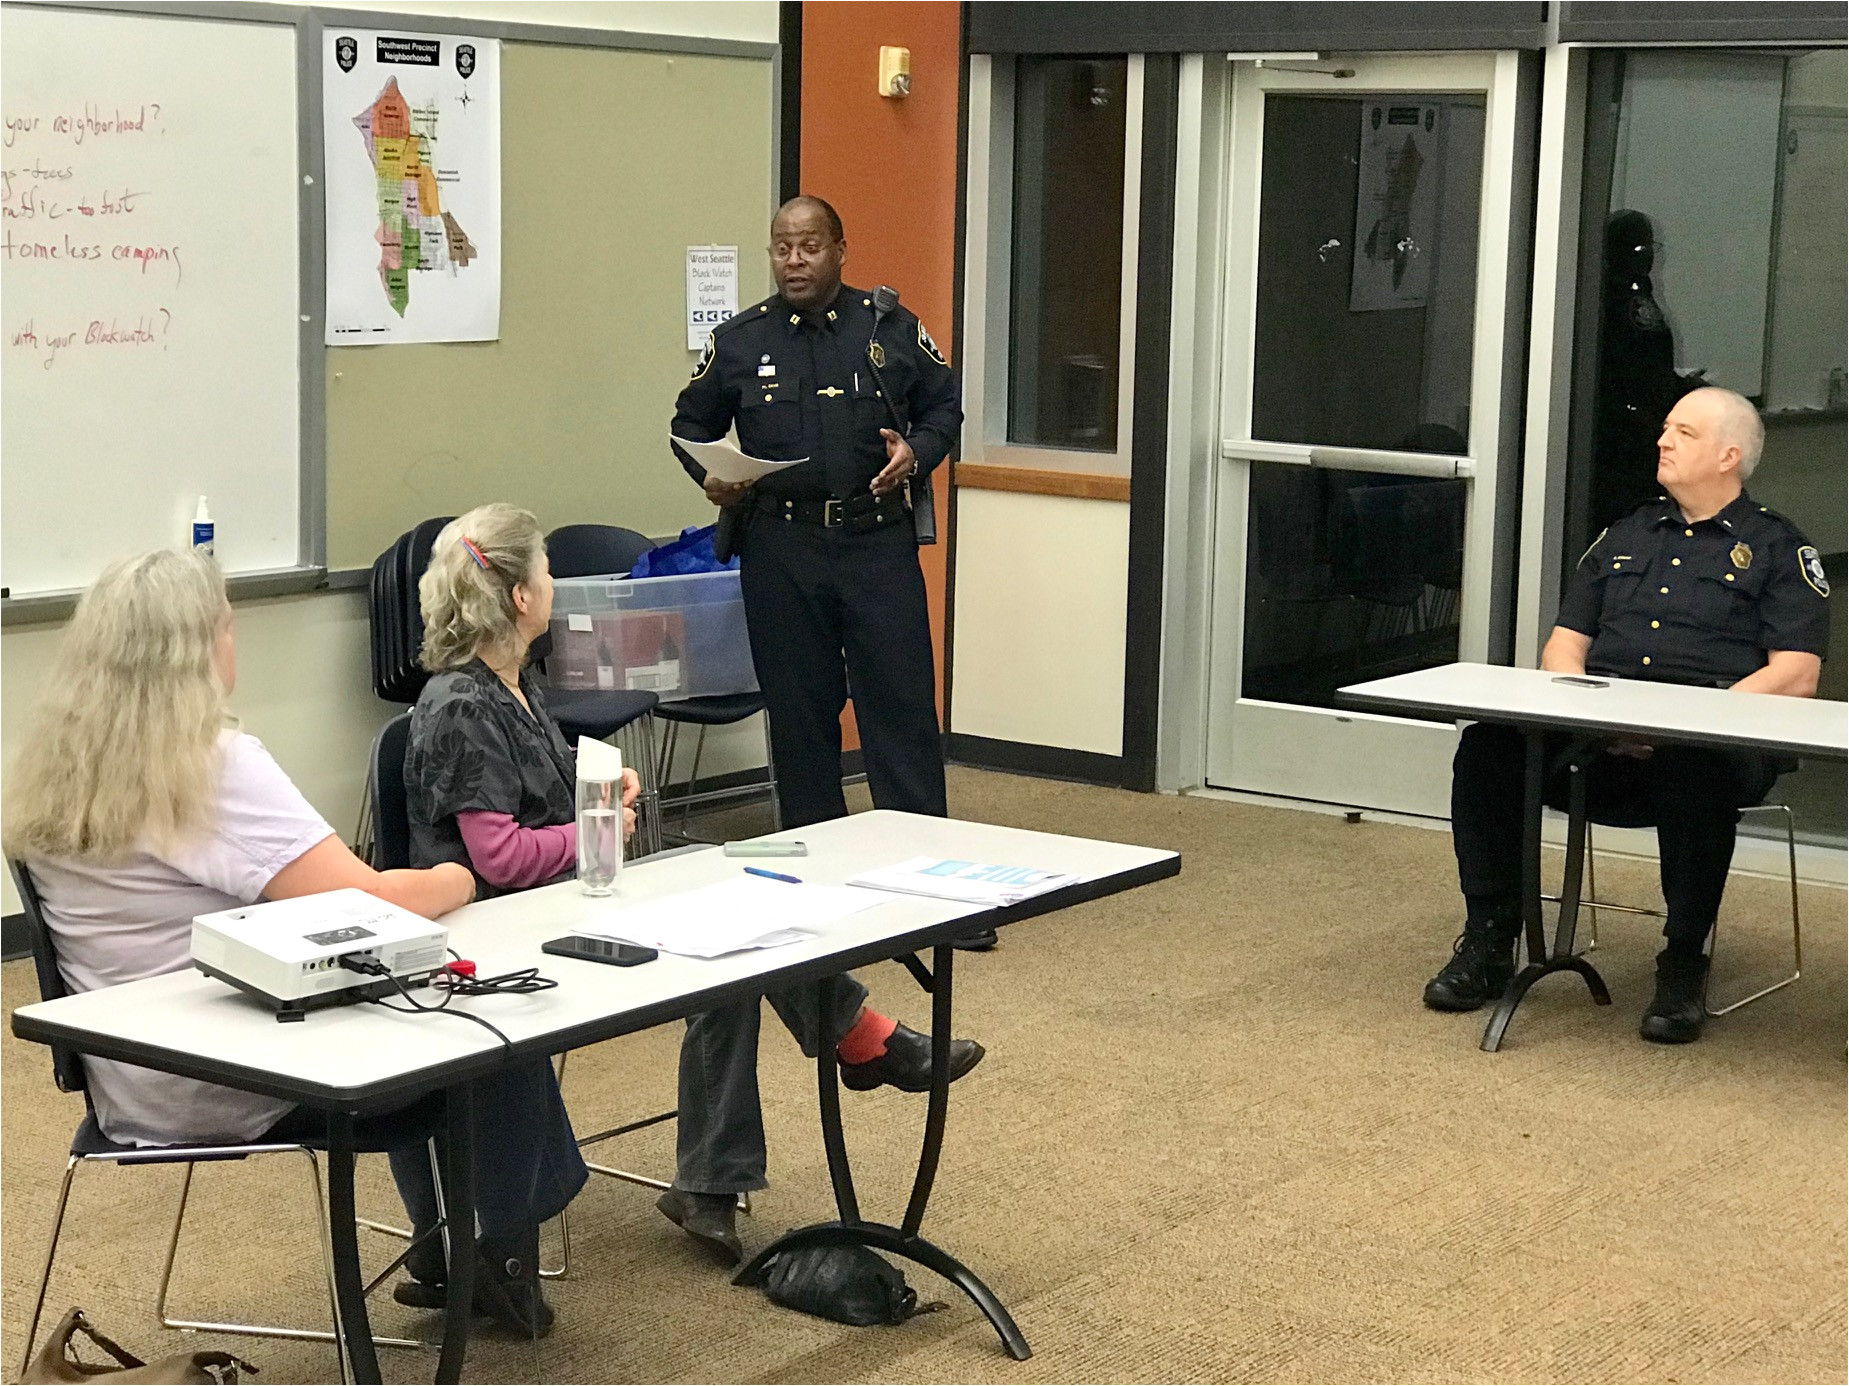 west seattle block watch captains network talks safety community 911 more